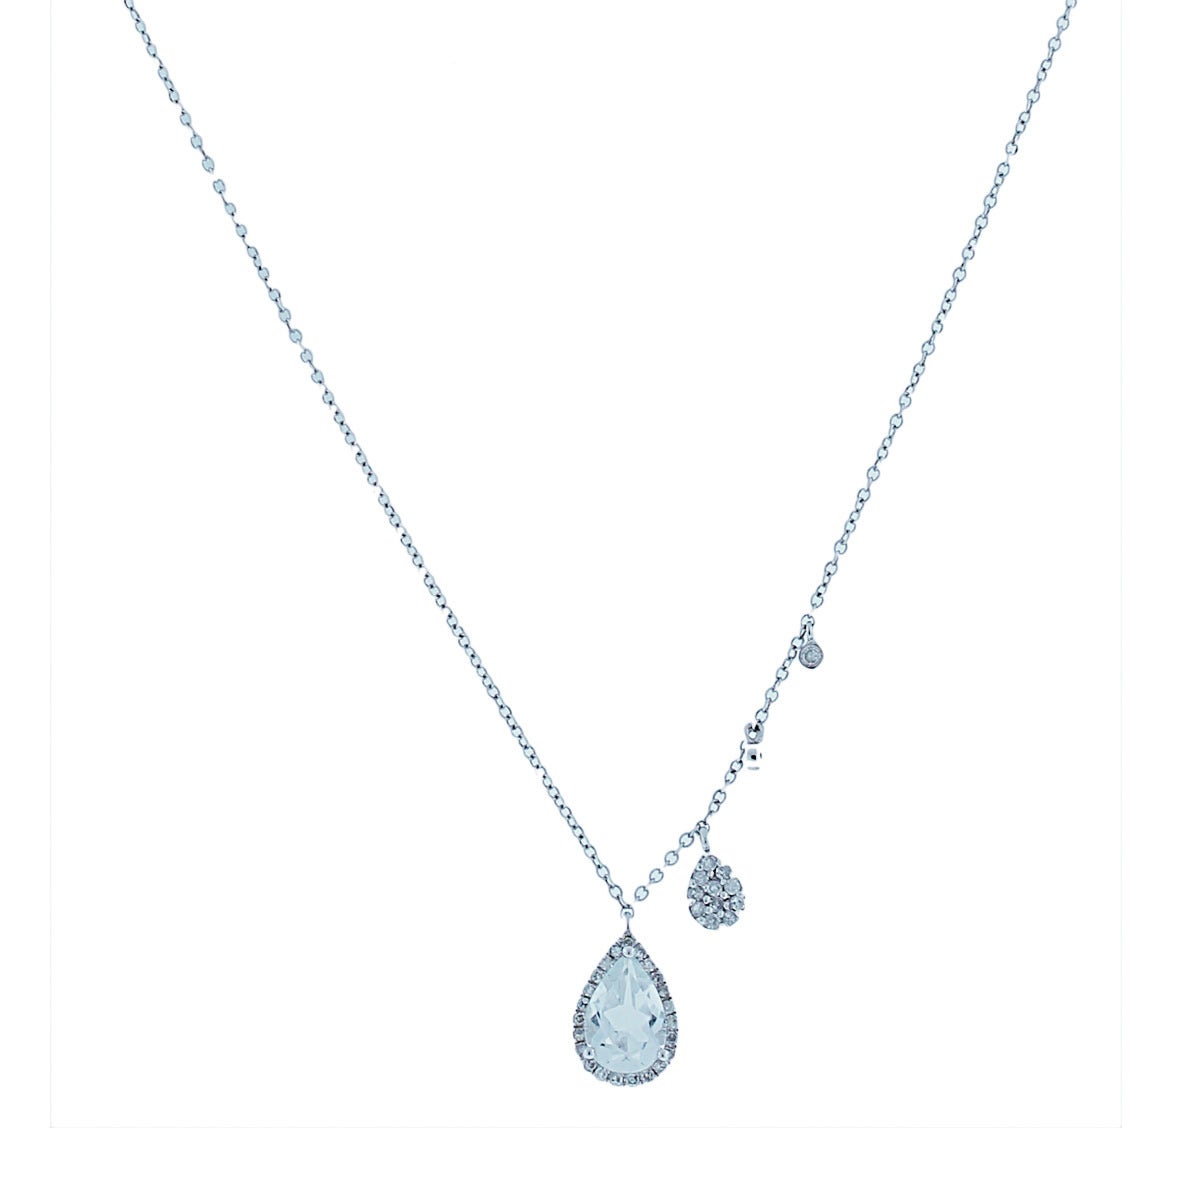 Brand: Meira T
Style: Clear Quartz & Diamond Necklace
Material:14k White Gold
Diamond Details: Diamonds are G/H in color and I in clarity
Total Weight: 2.3g (1.5dwt)
Necklace Length: Chain is 16''
Pendant Size: .51